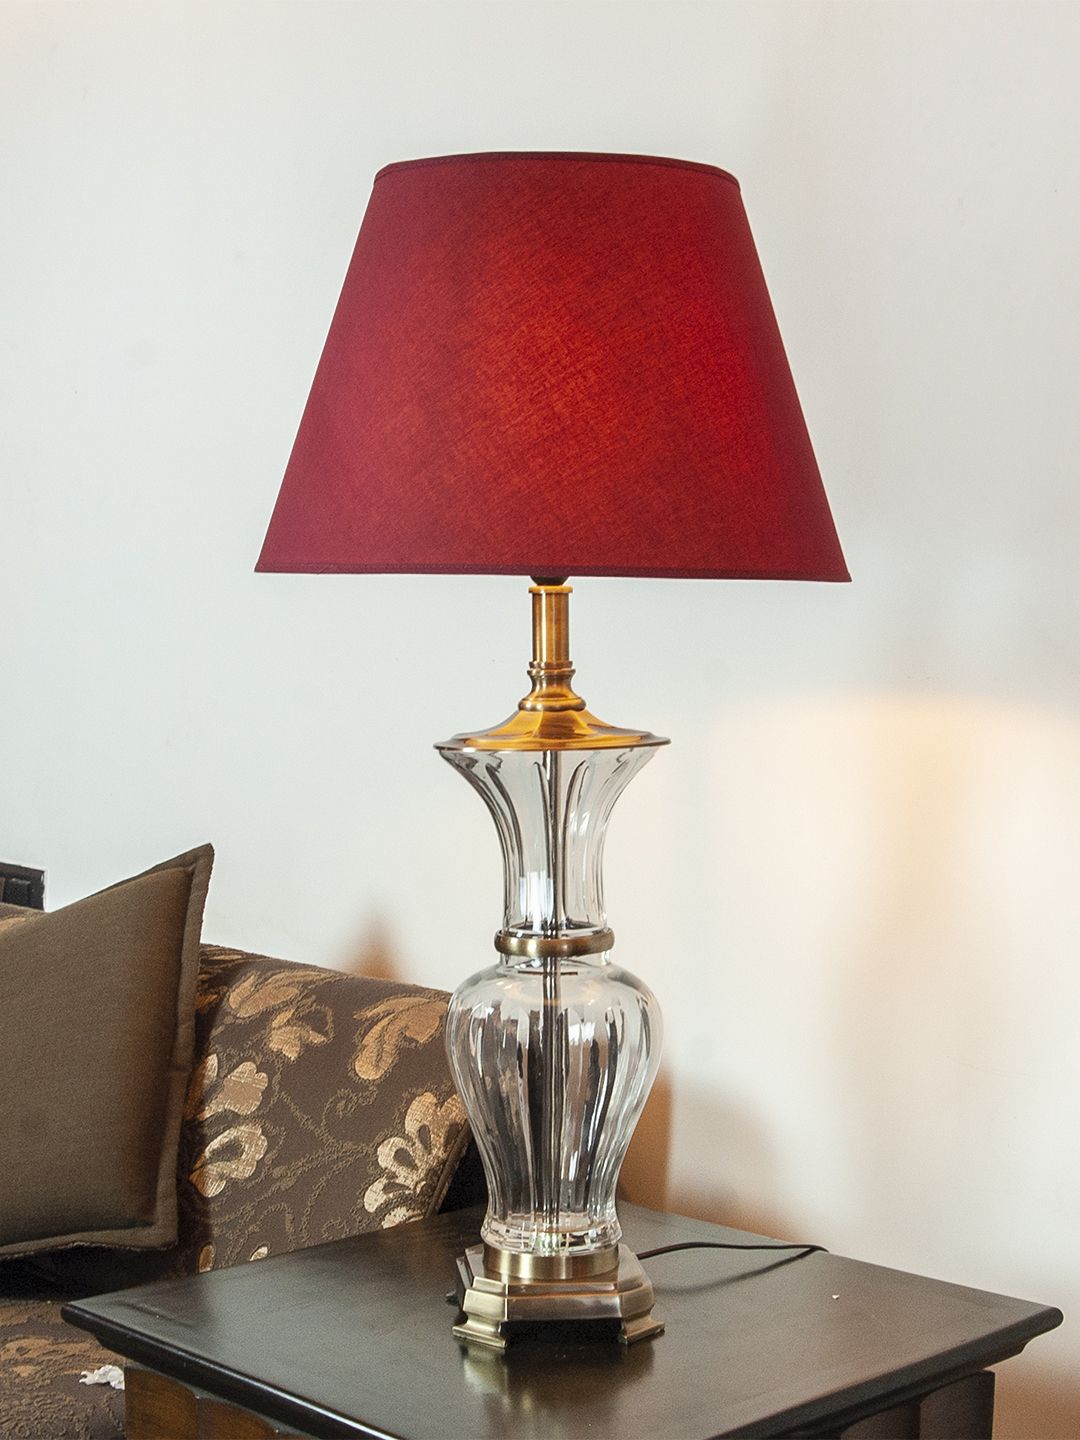 THE LIGHT STORE Gold-Toned & Red Self Design Bedside Standard Table Lamp with Shade Price in India